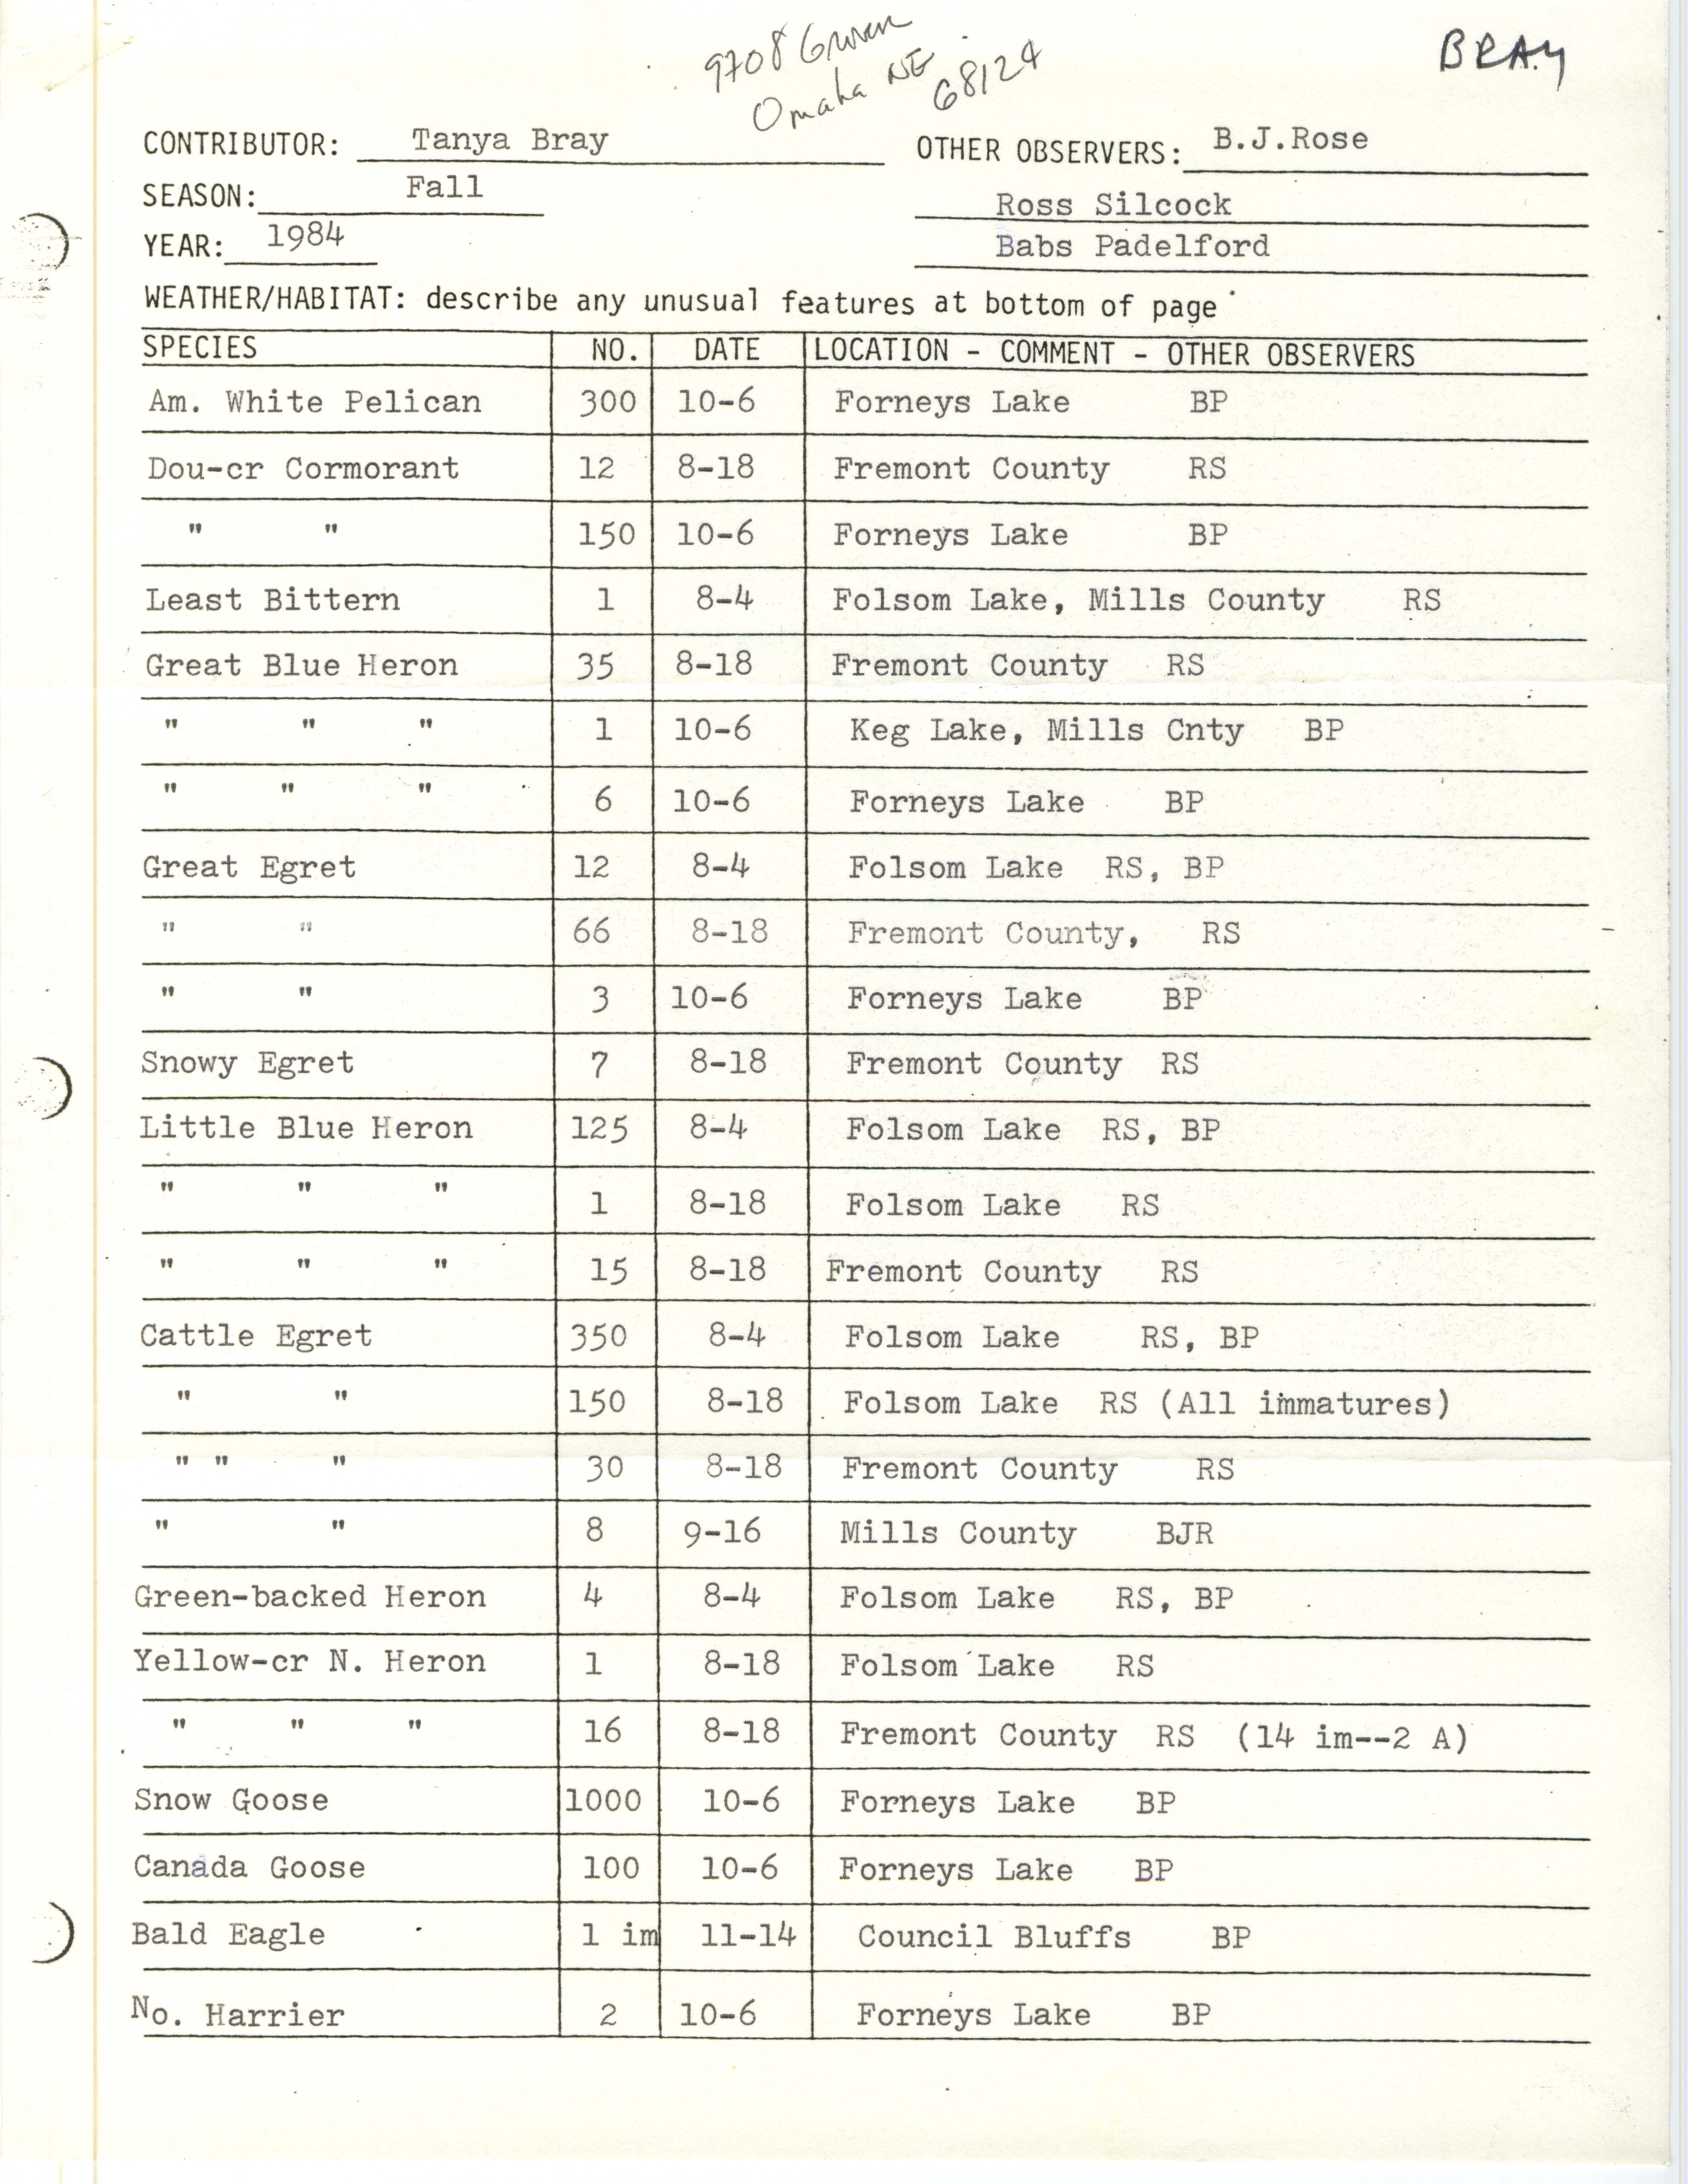 Field notes contributed by Tanya Bray, fall 1984